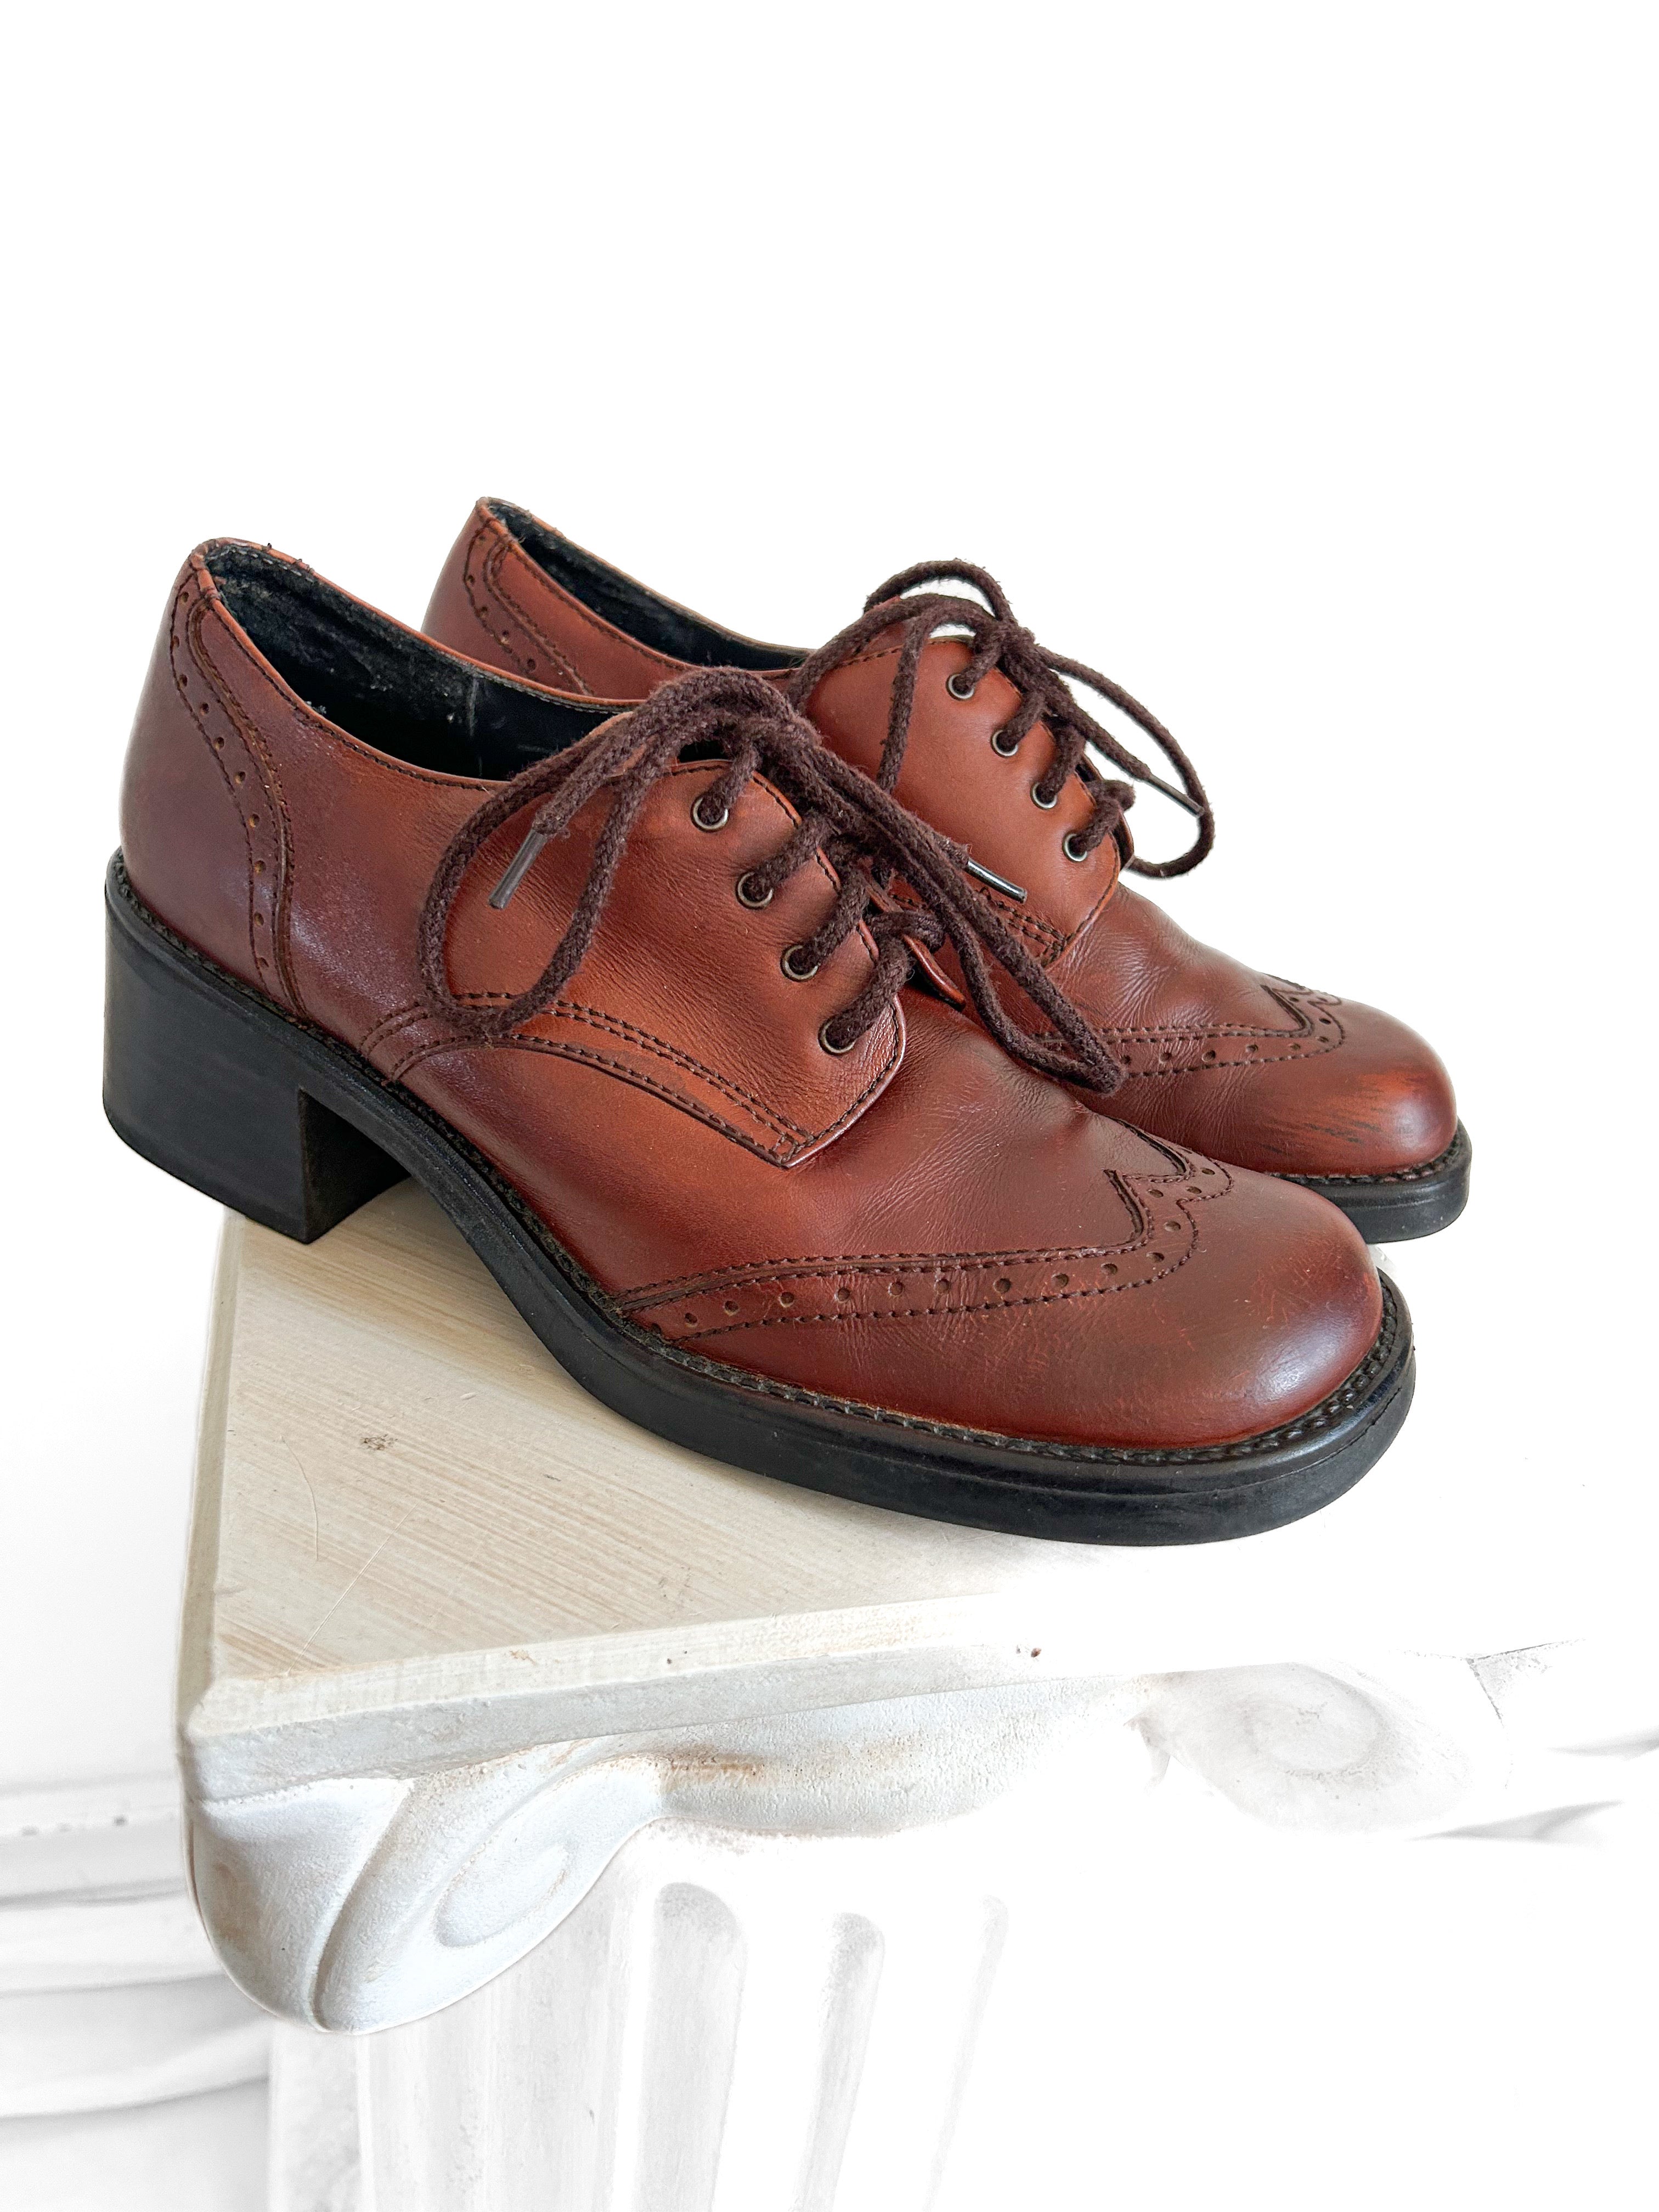 90s Brown Leather Chunky Heeled Oxford Style Shoes, size 38